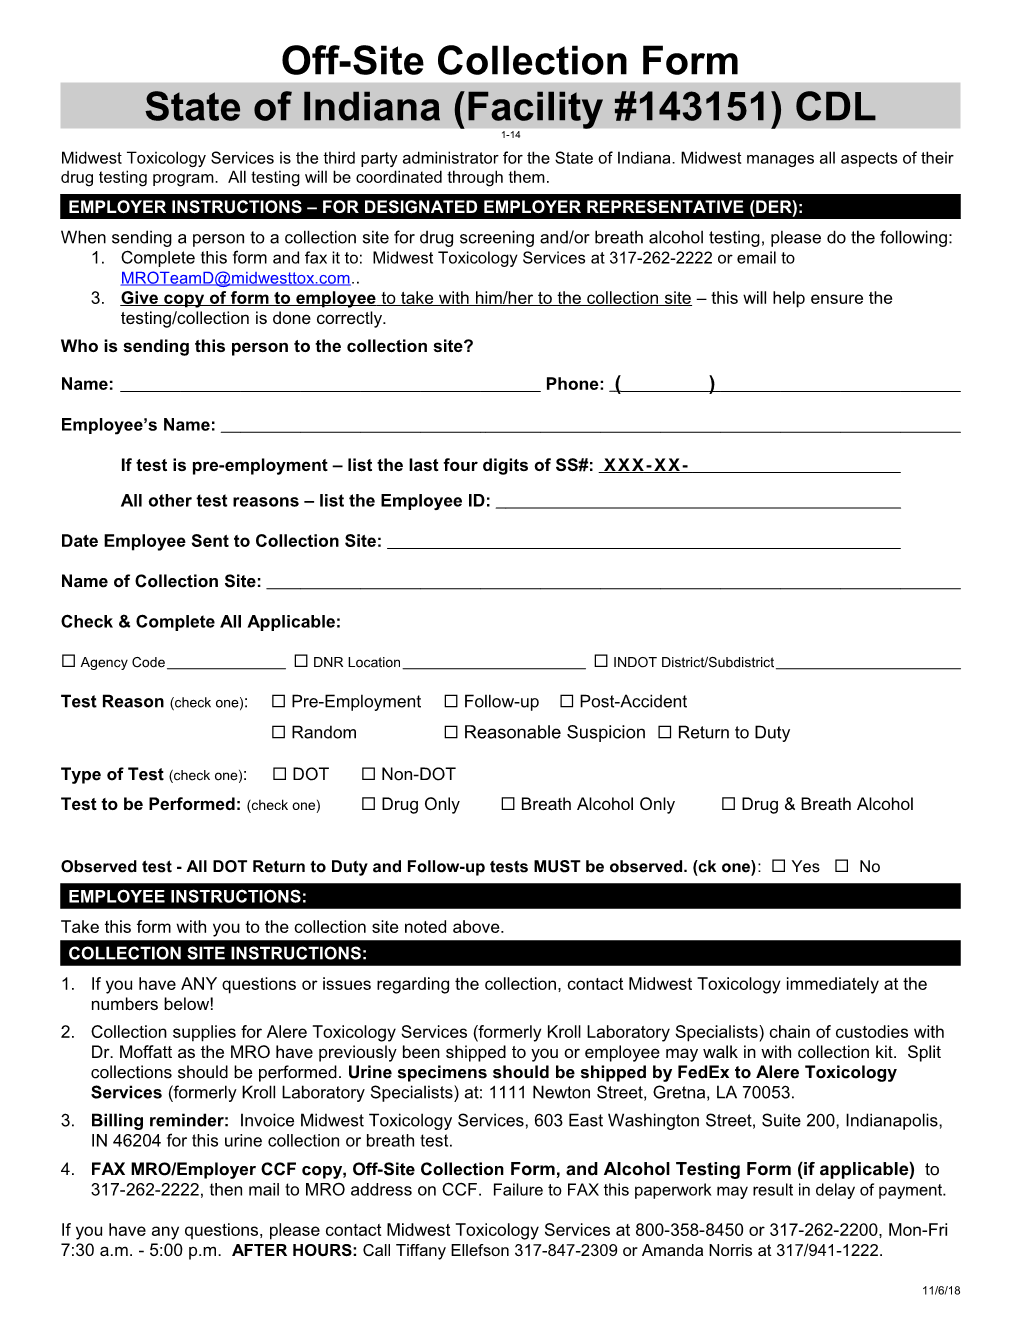 Off-Site Collection Form State of Indiana